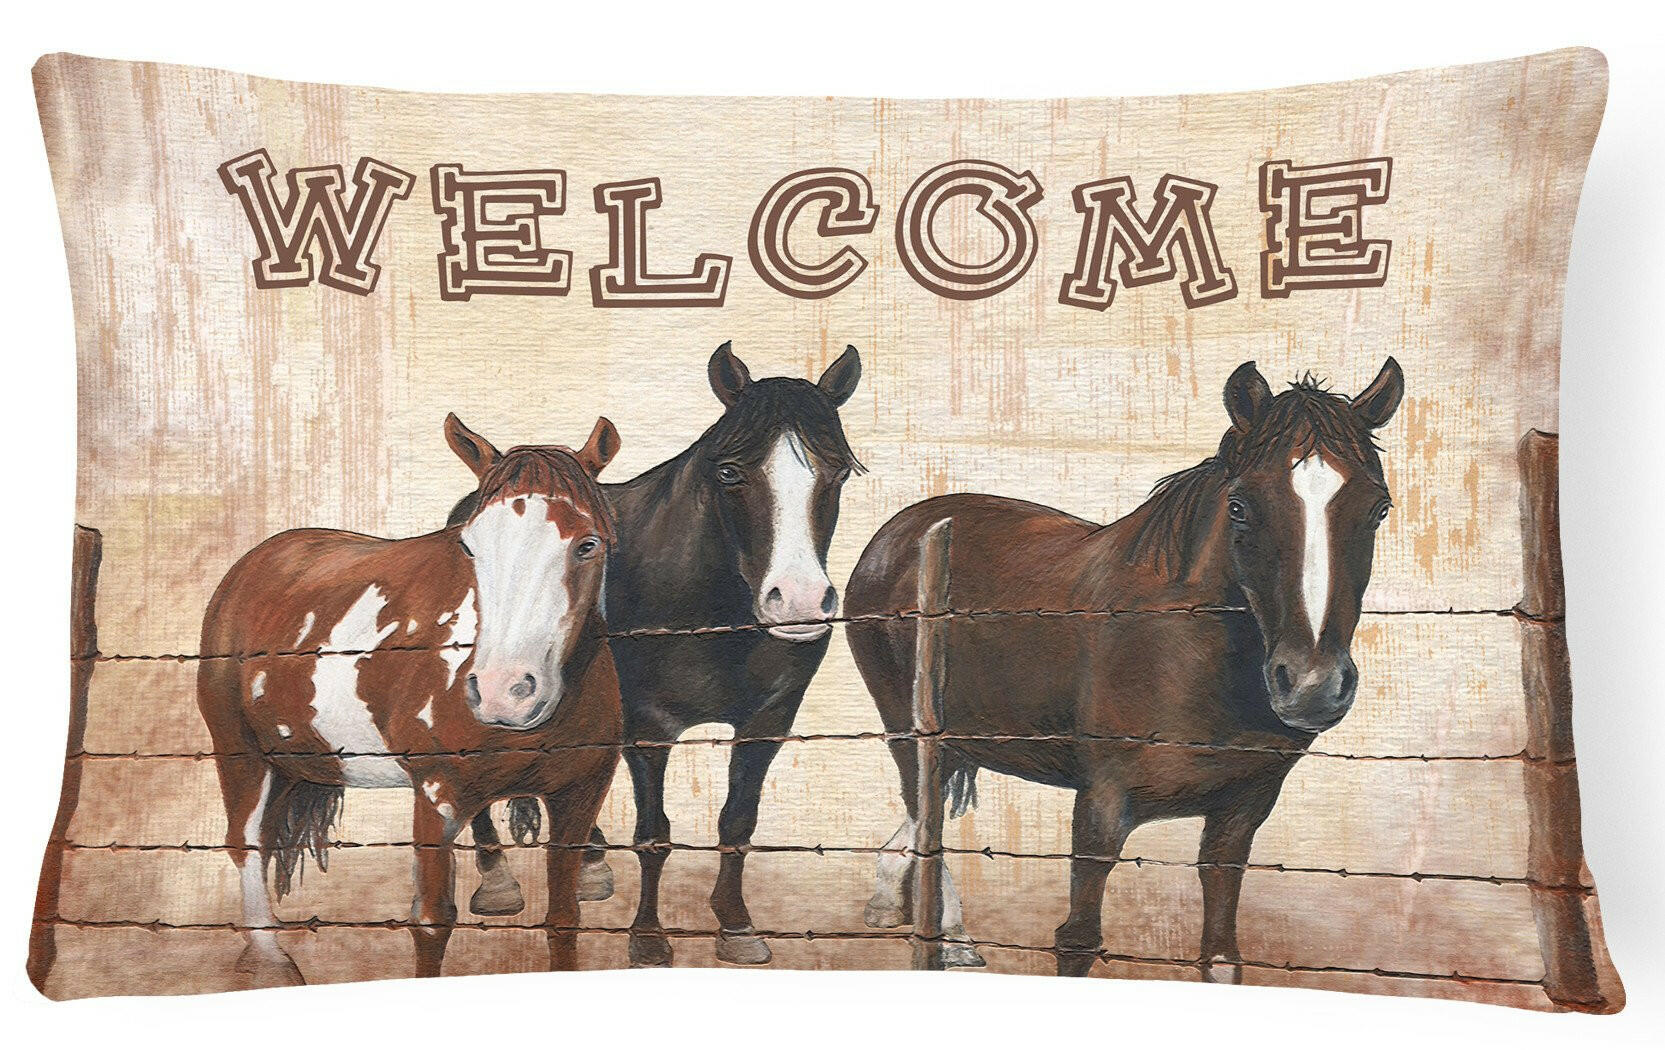 Welcome Mat with Horses   Canvas Fabric Decorative Pillow SB3059PW1216 by Caroline's Treasures